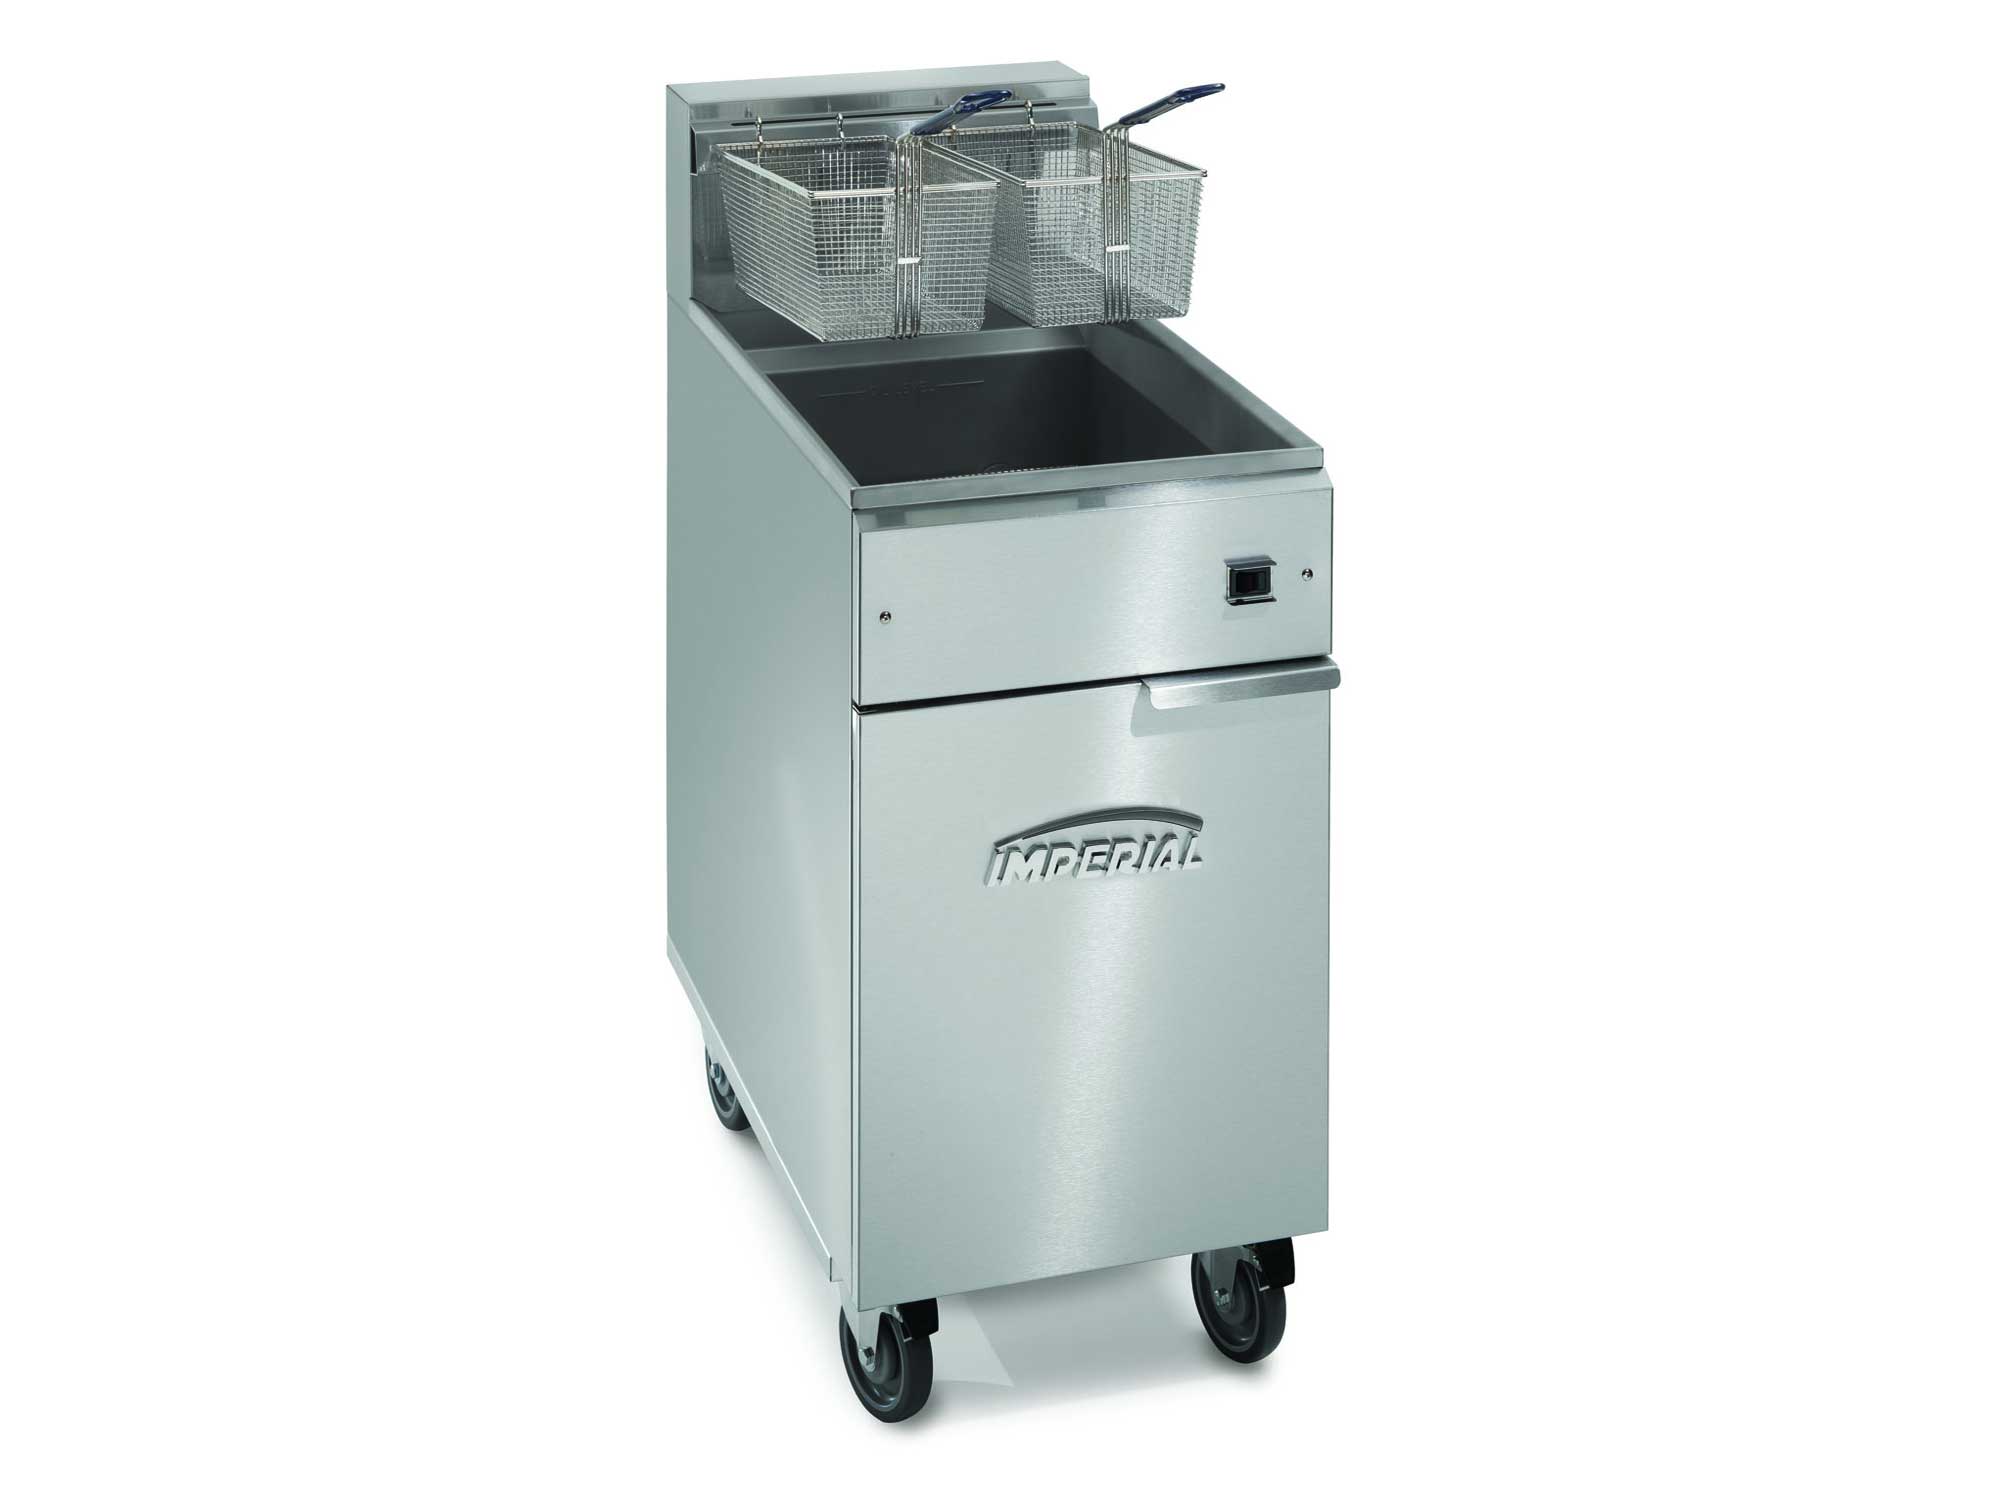 220-240 Volt Imperial Electric Commercial Fryers Imperial IMIFS-75E